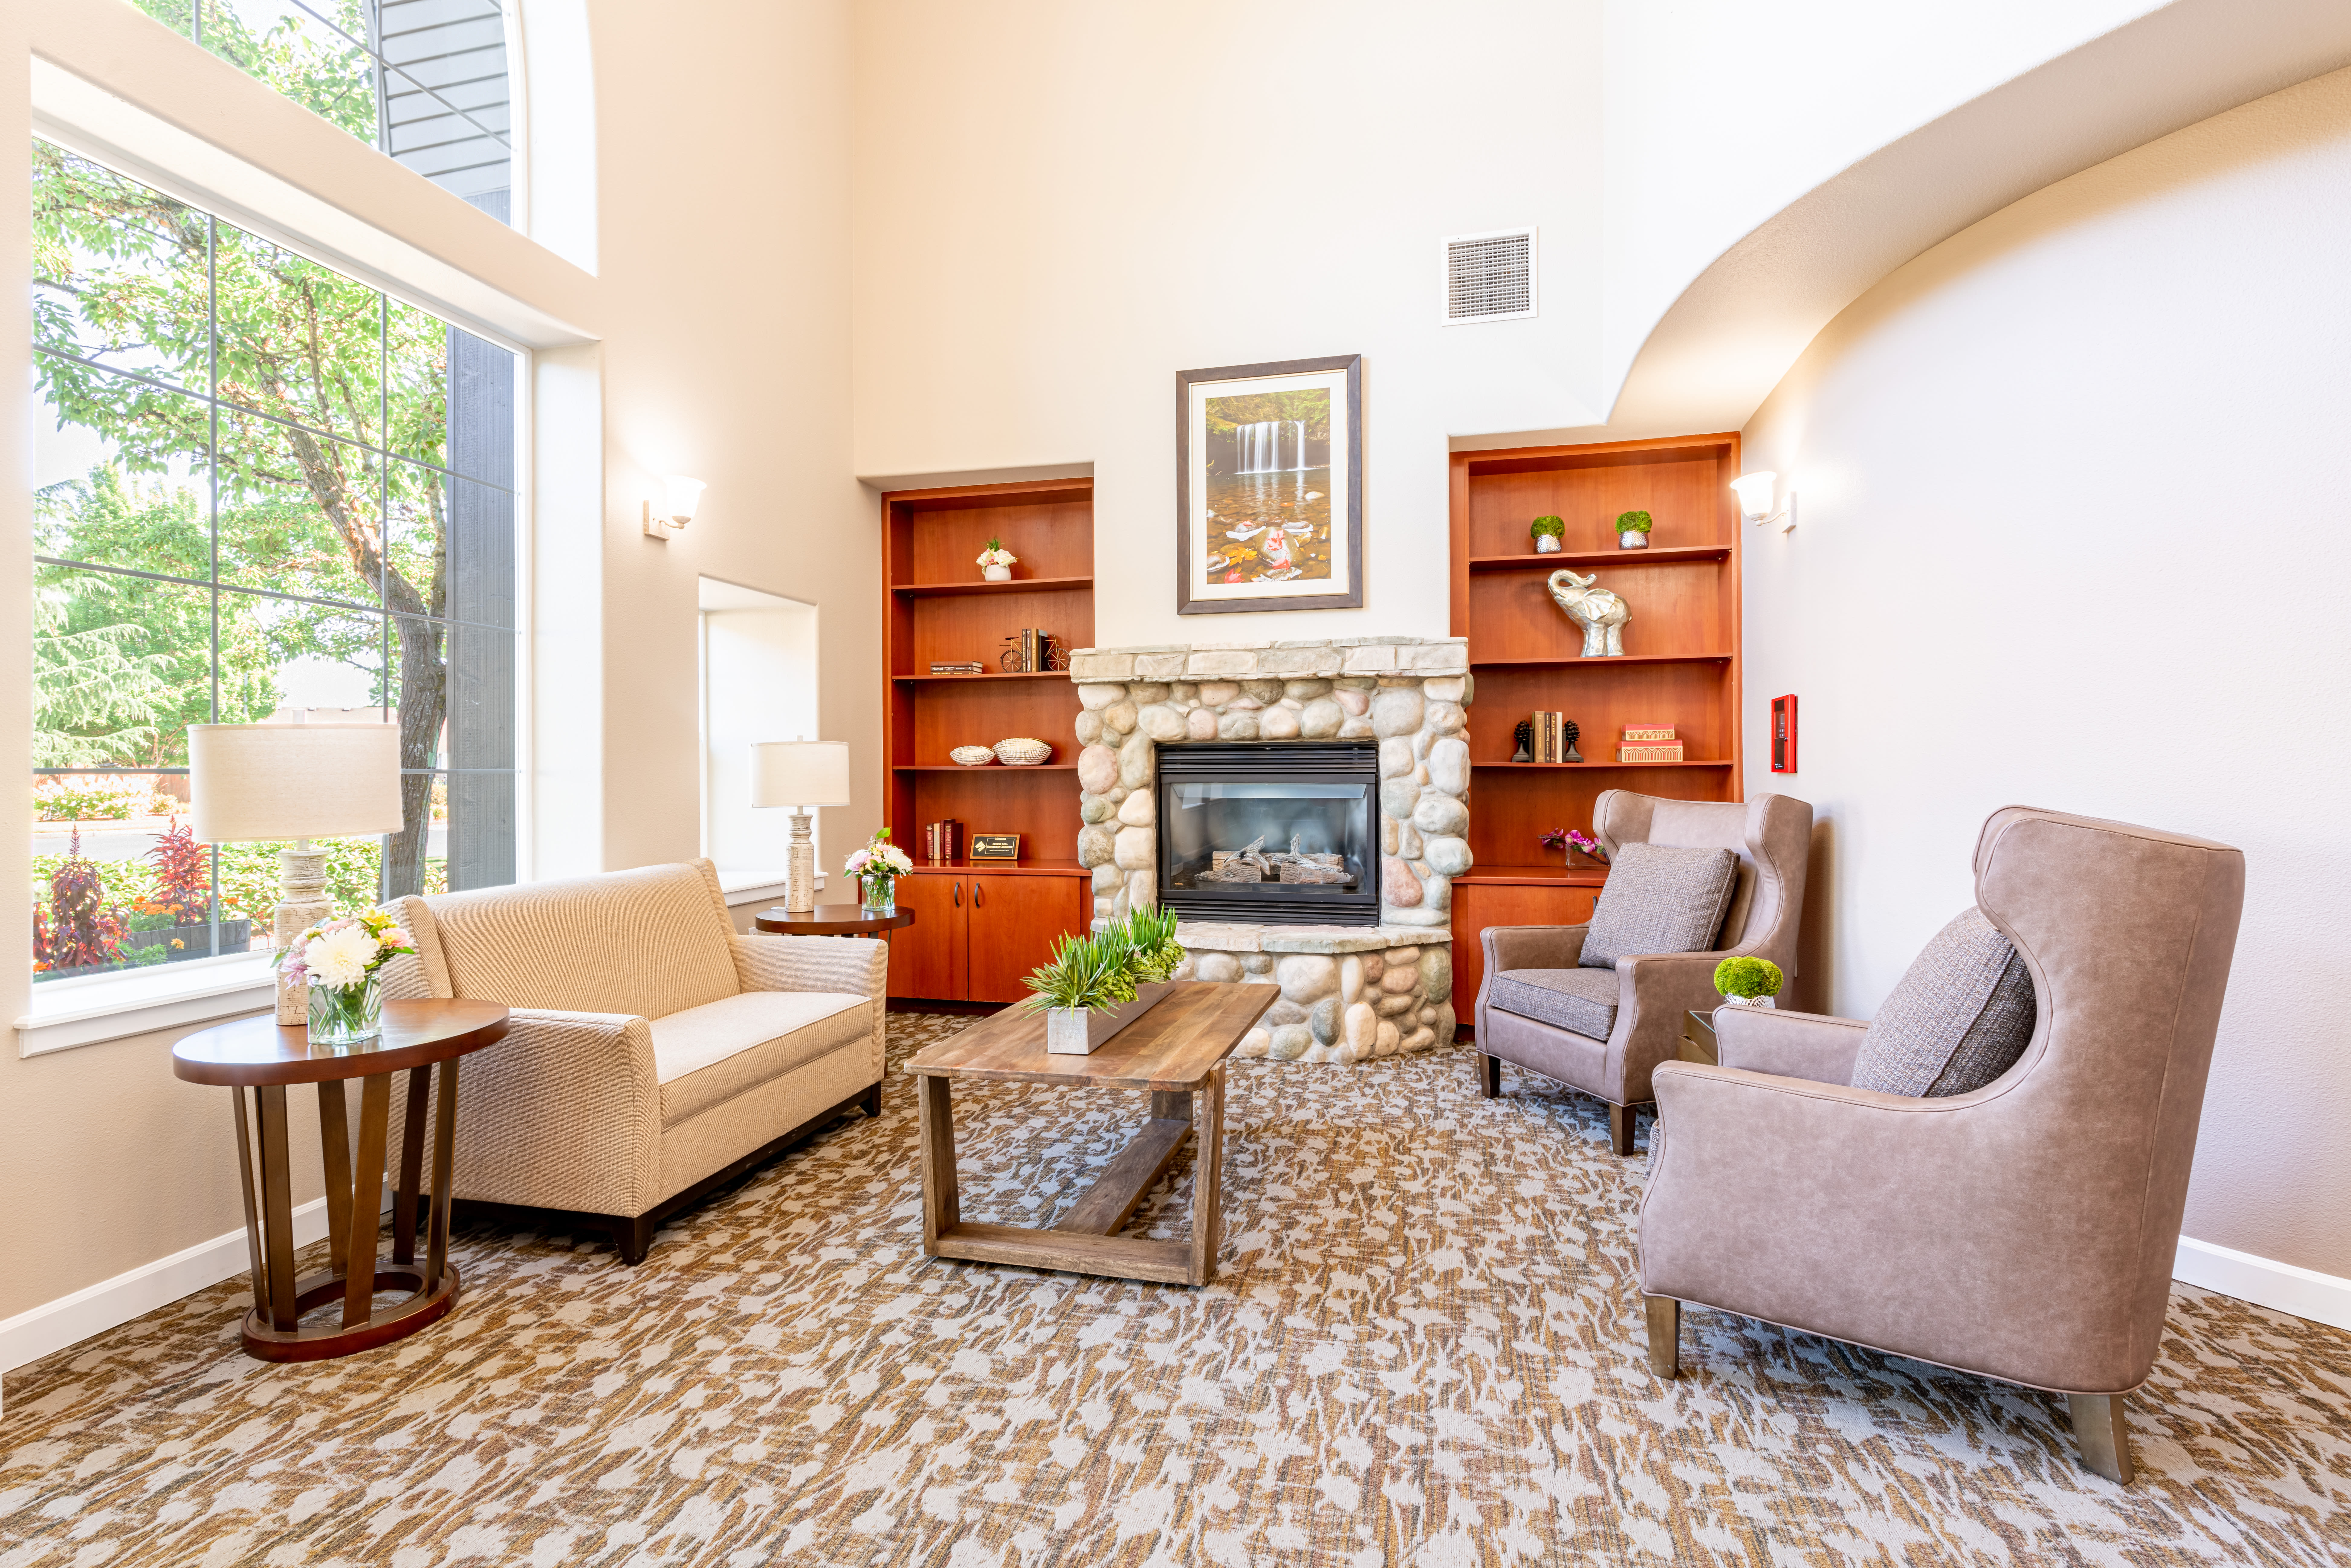 Cozy sitting area with bookcases and armchairs at Evergreen Memory Care in Eugene, Oregon. 